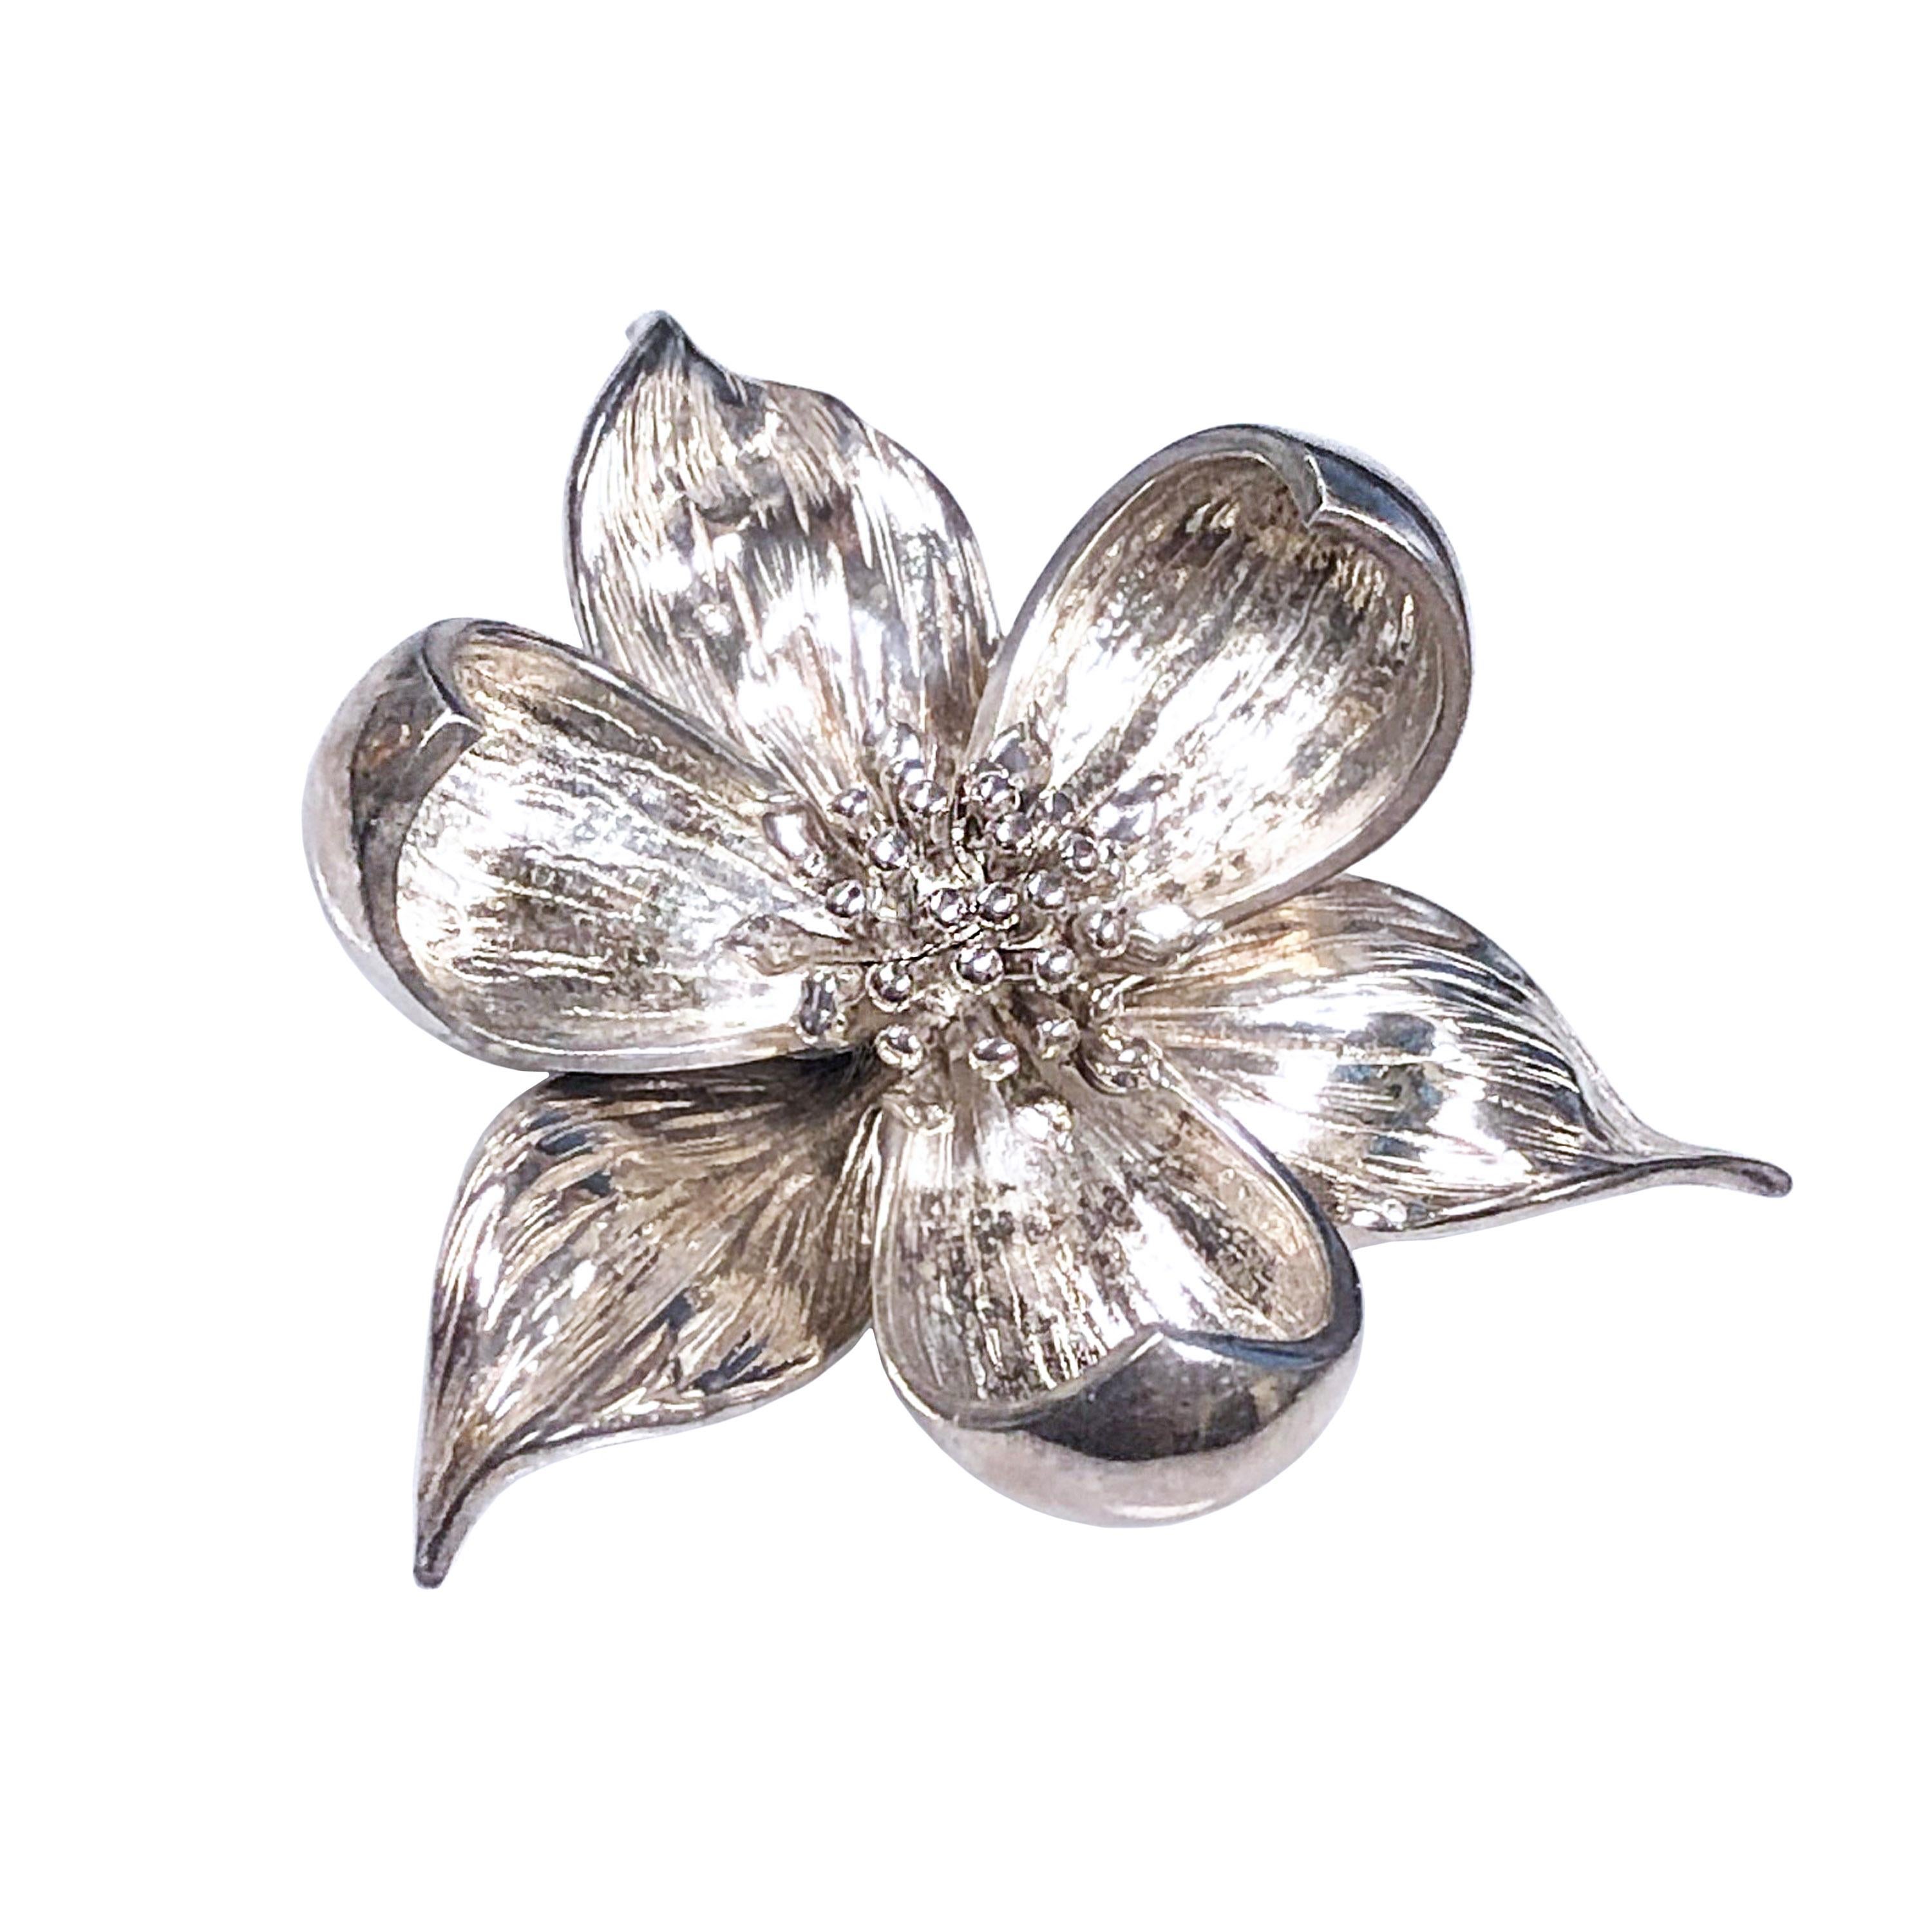 Circa 1980s Tiffany & Company Sterling Silver Orchid Brooch, measuring 1 3/4 inches in length and 1 1/2 inches wide. Excellent unworn condition.